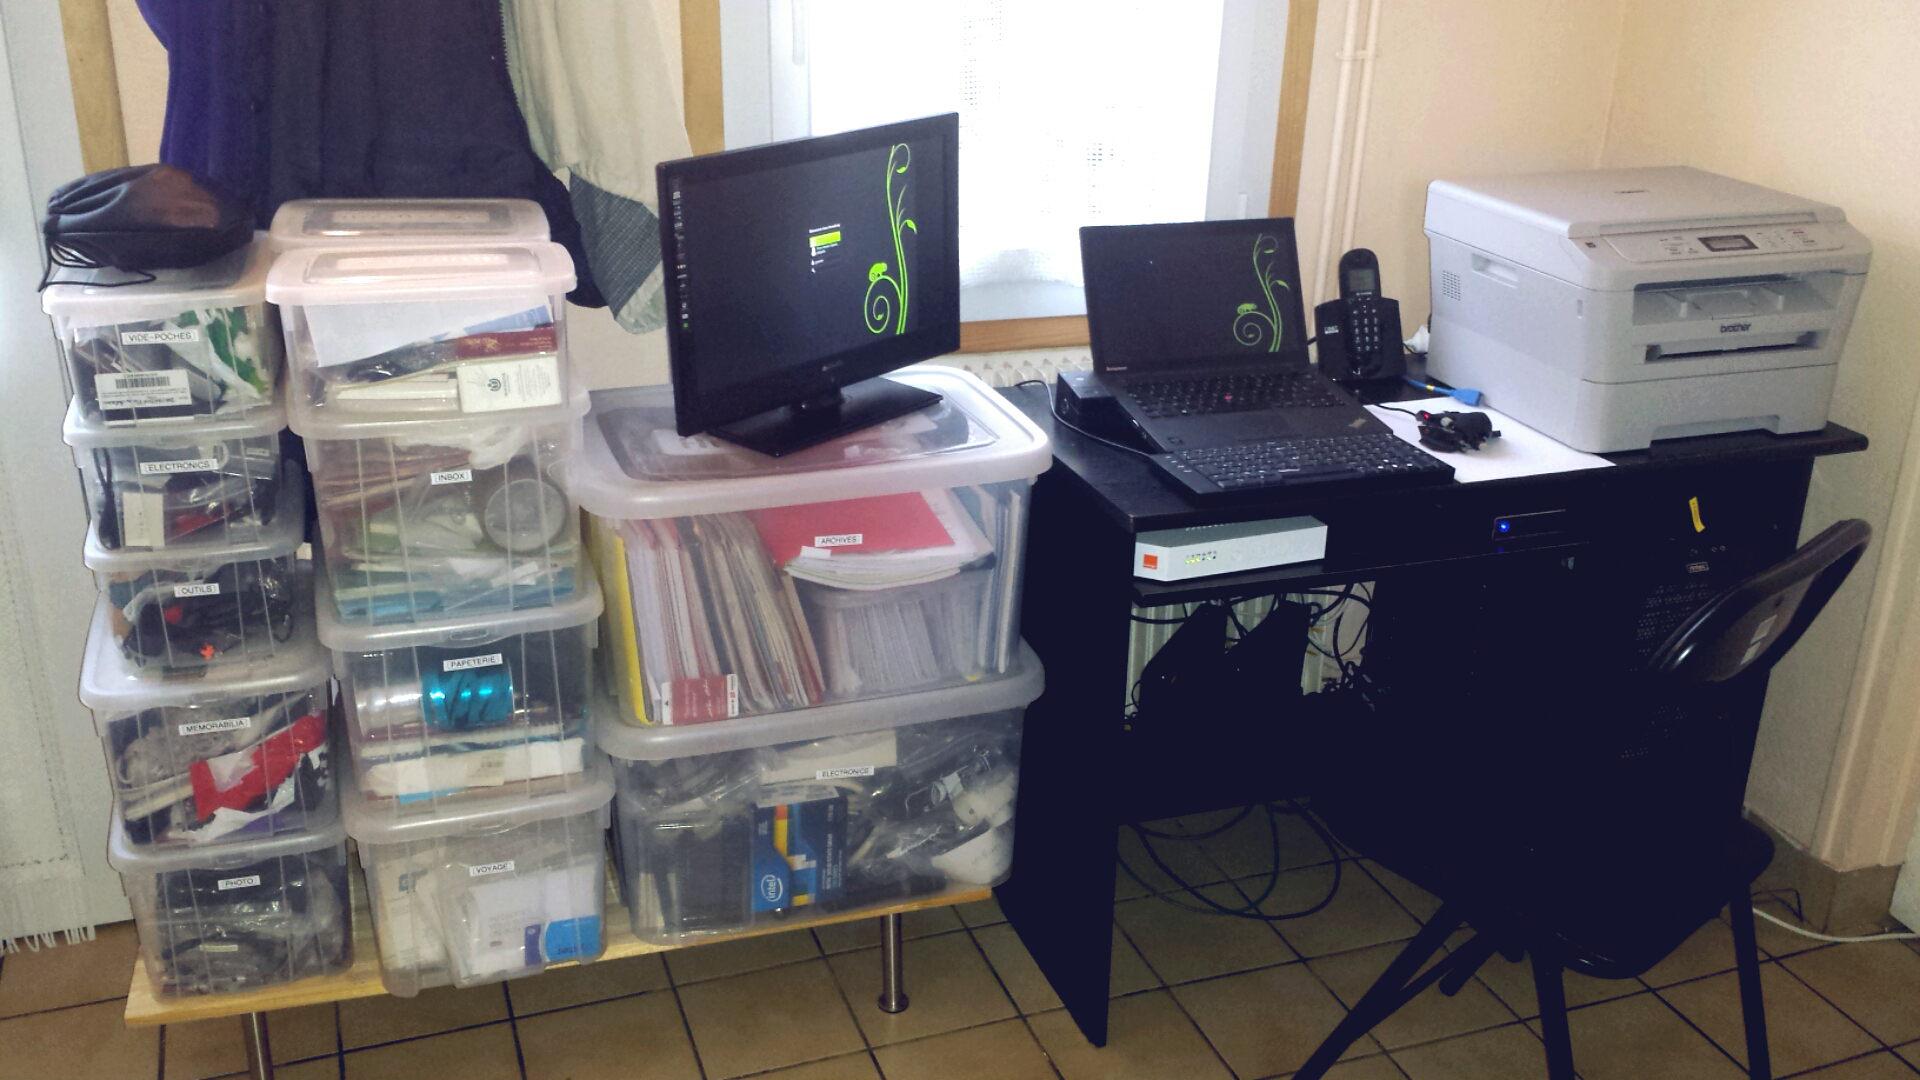 A work station set up on an desk in front of a window, next to a stack of plastic boxes.